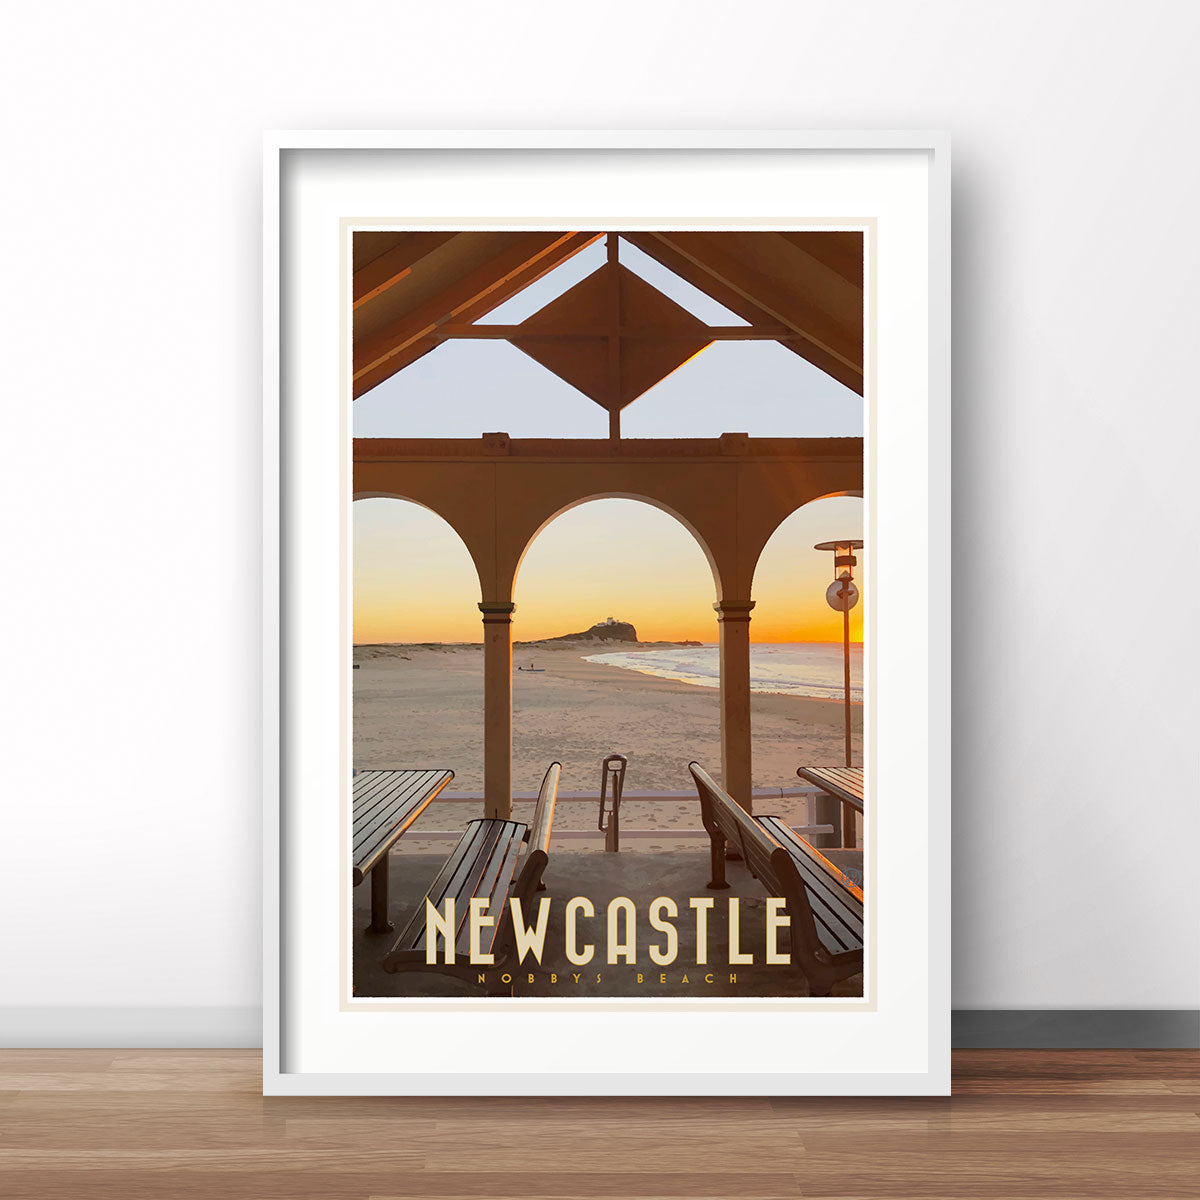 Newcastle poster vintage travel style designed by Places We Luv